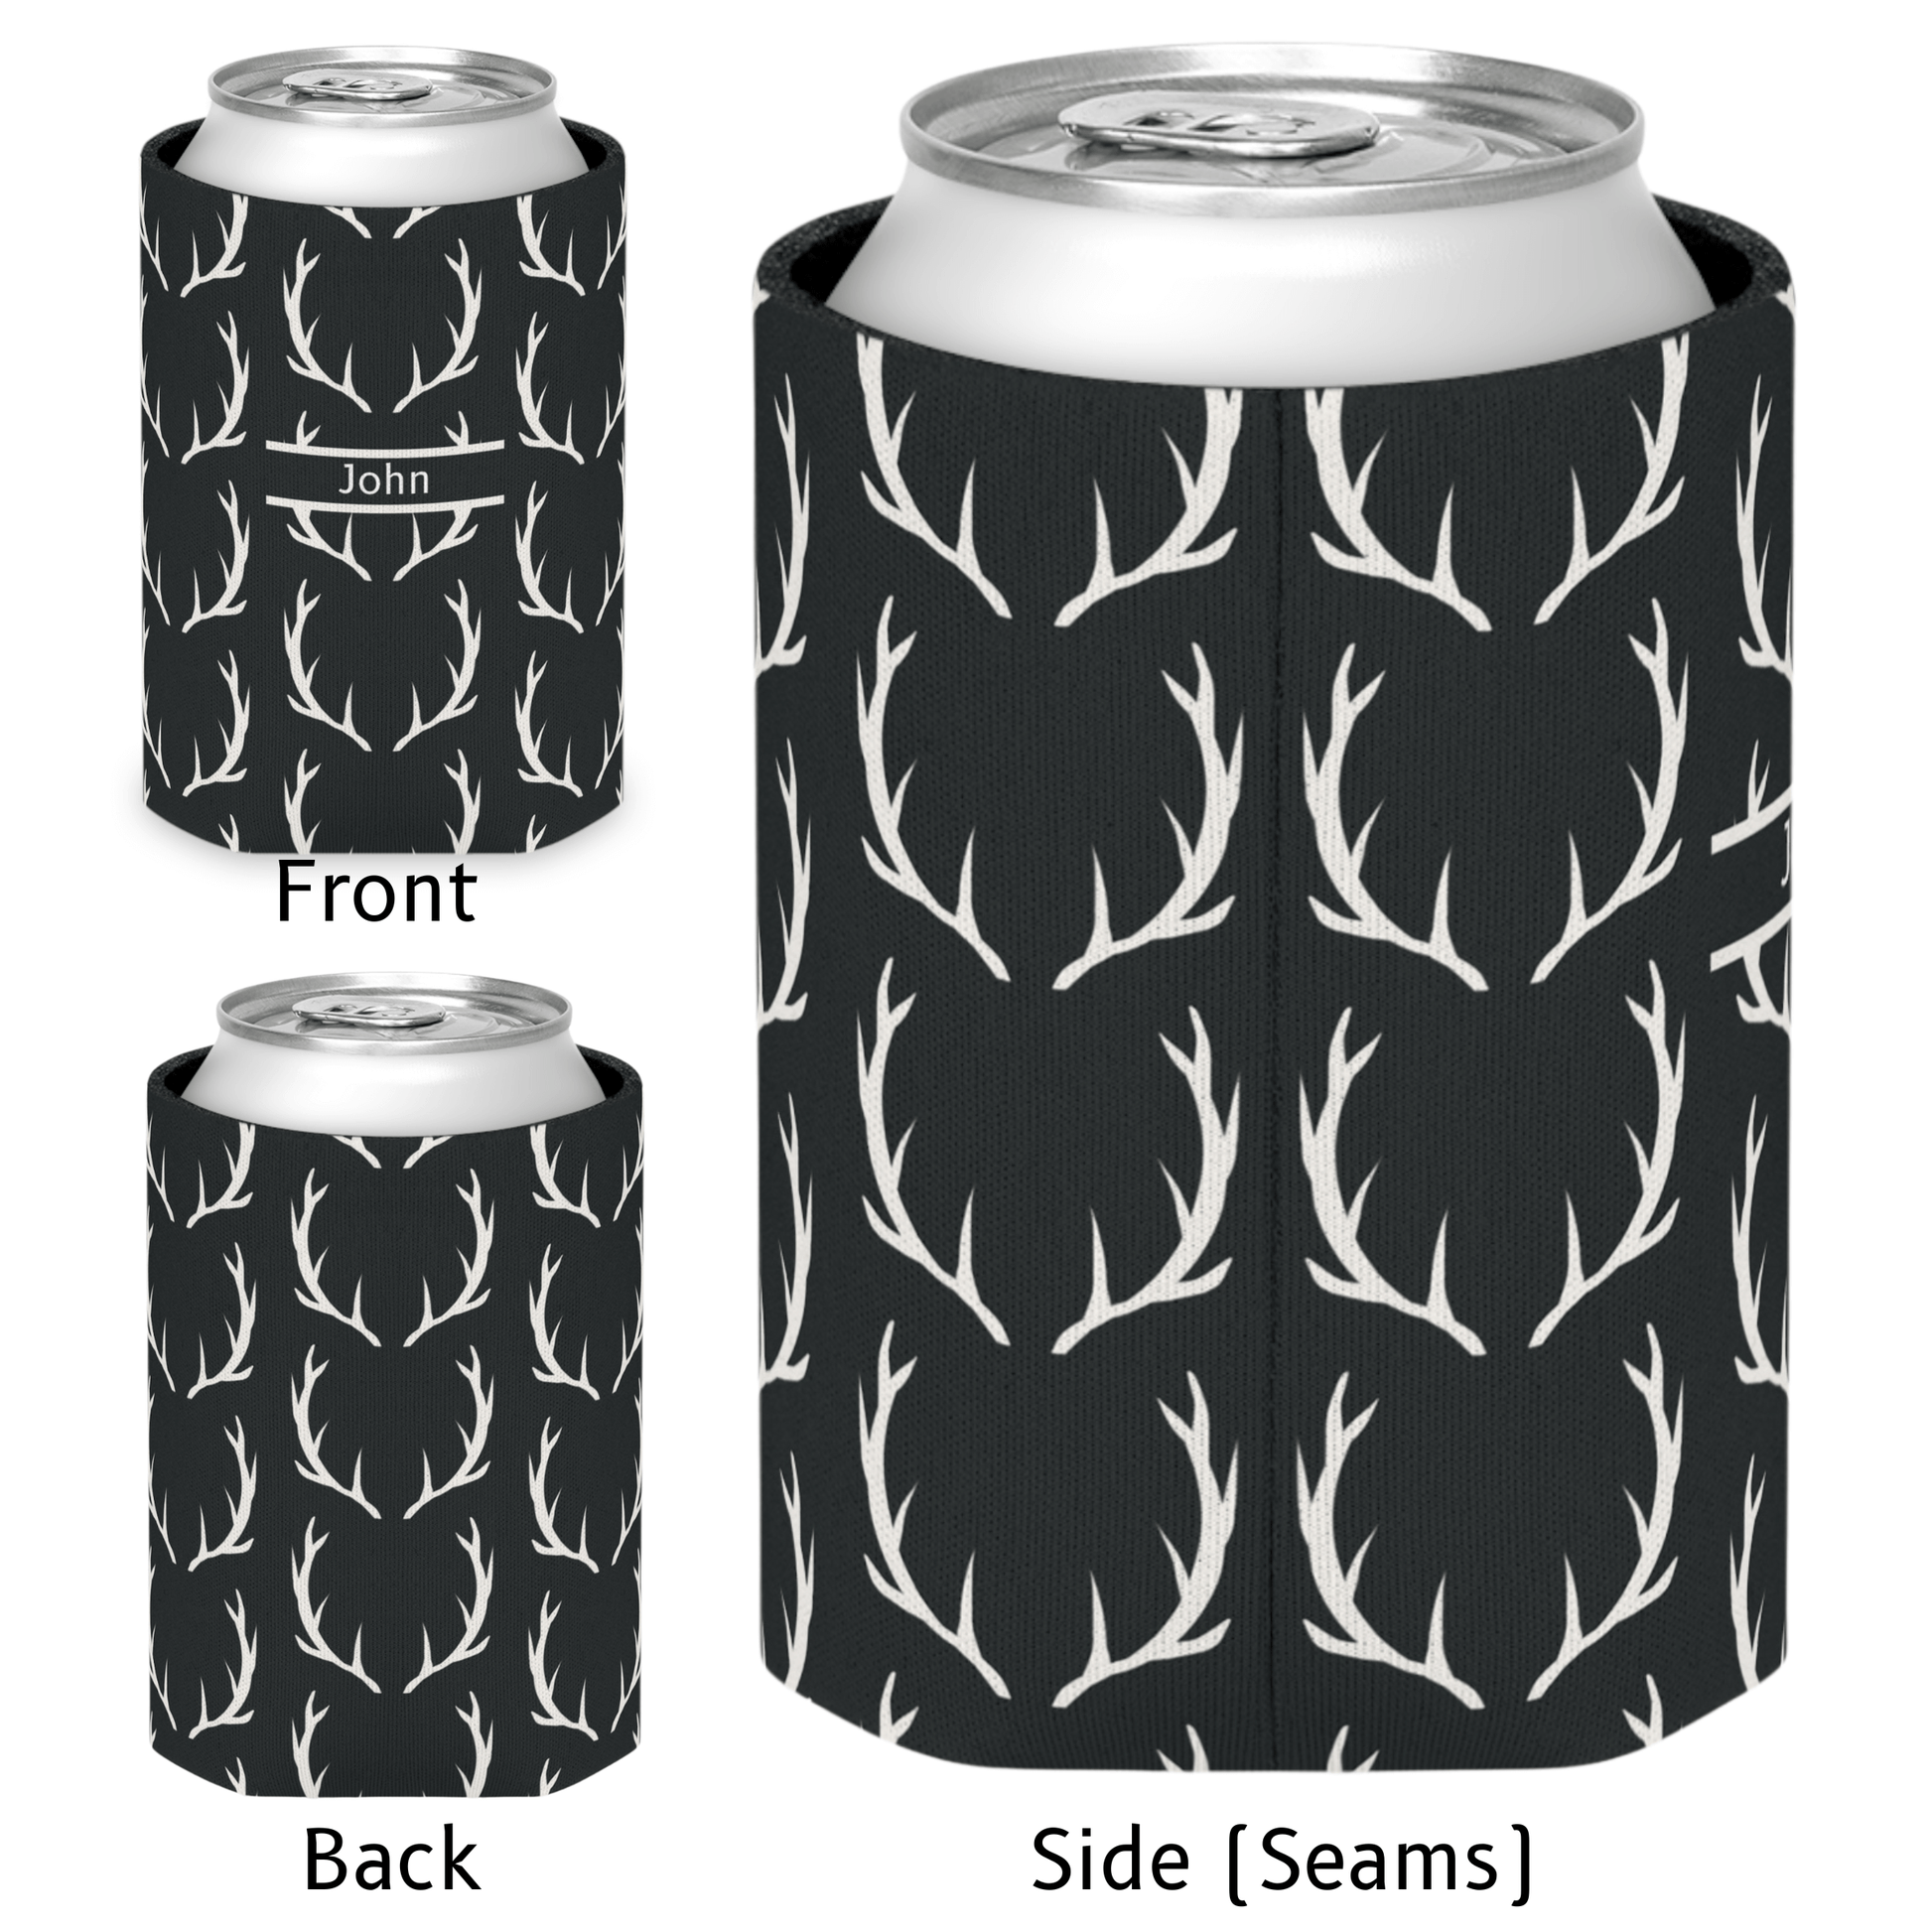 All sides of our deer antler koozie shows detail of the seam. The deer antler horns are continious.